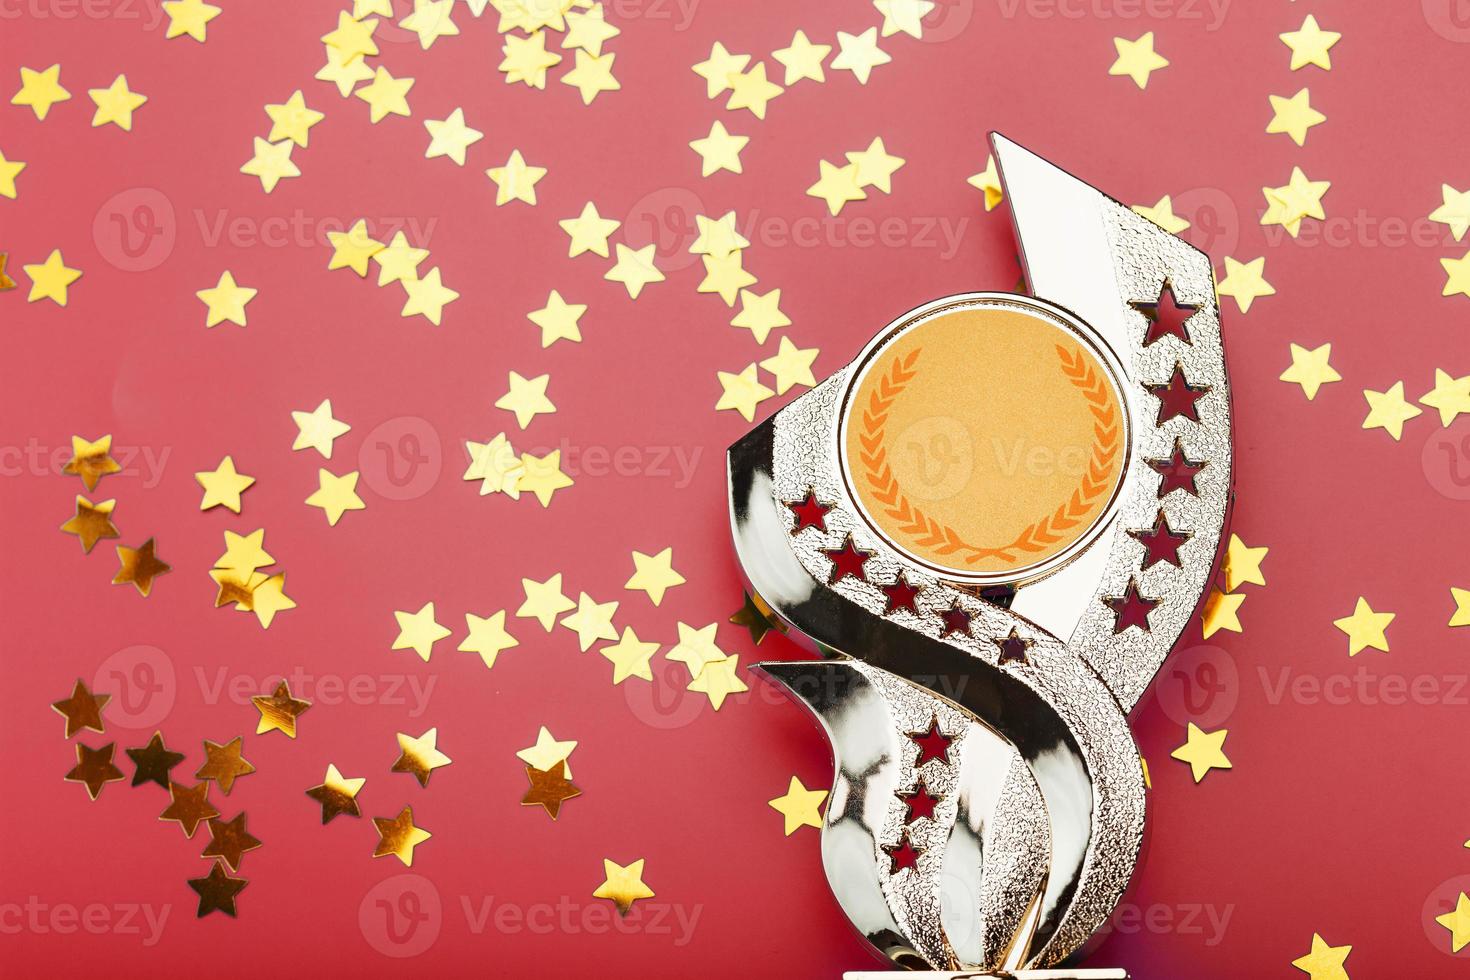 Golden Superprize with a scattering of stars on a red background. photo